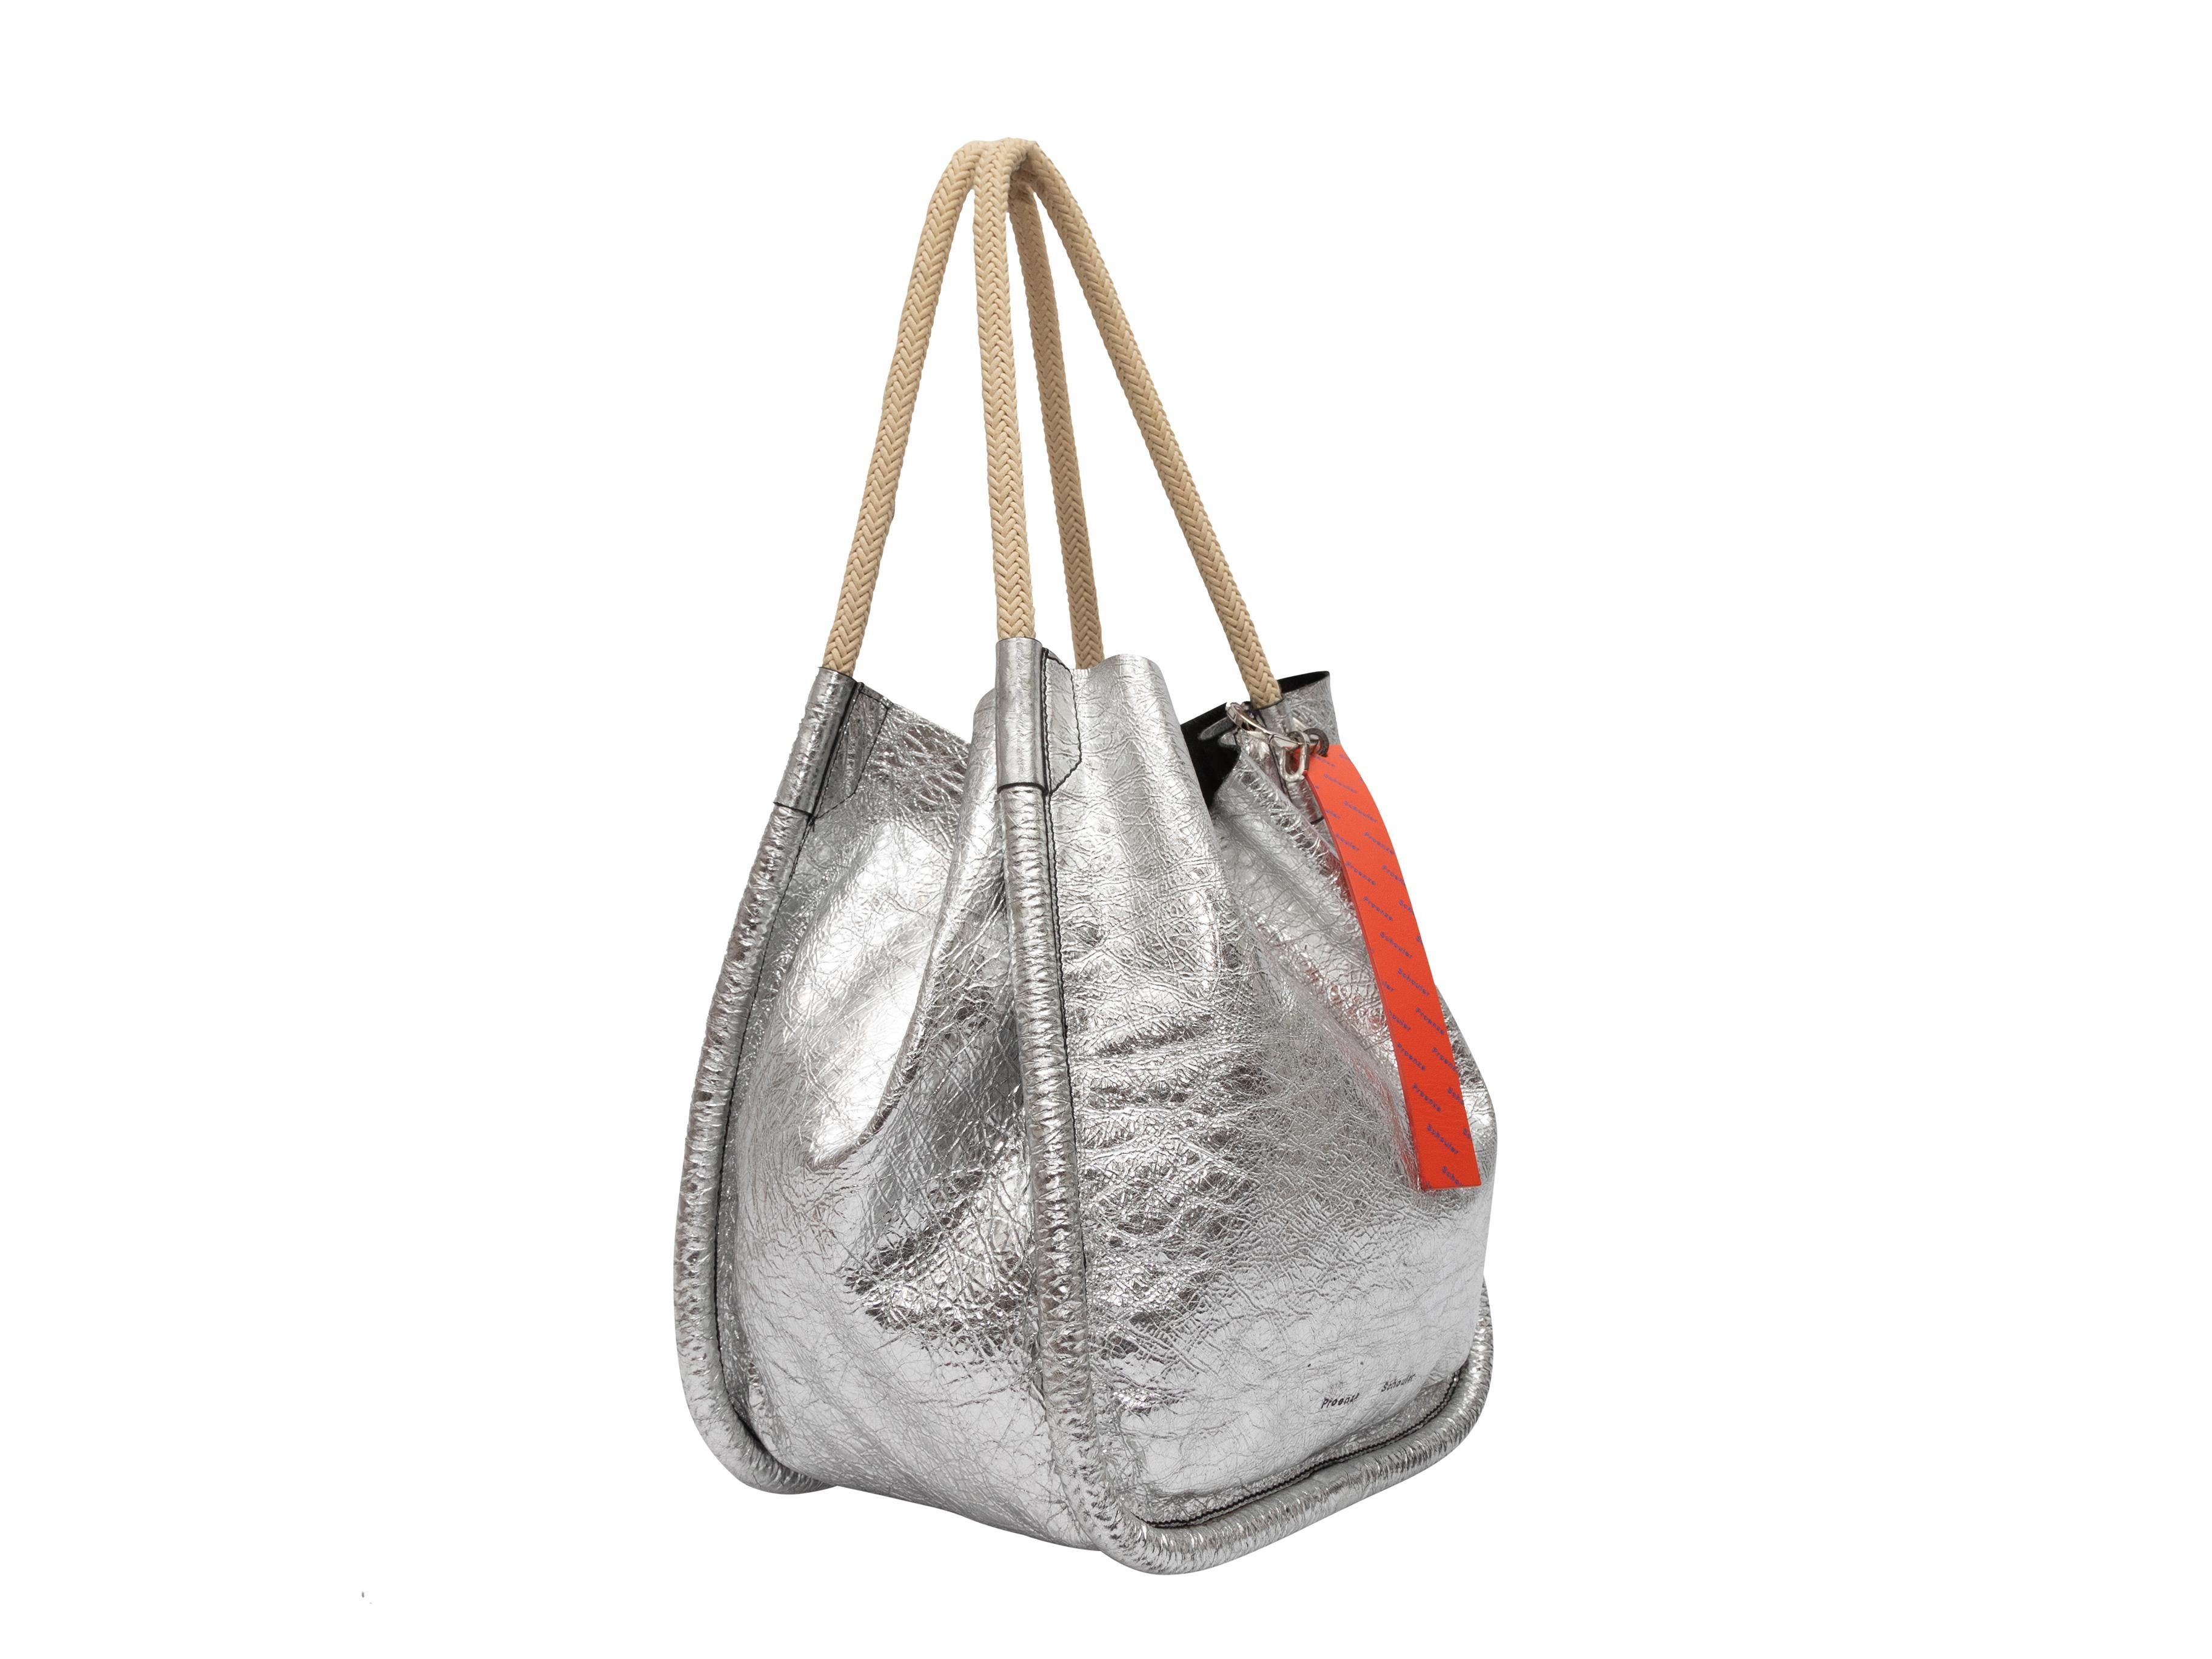 Product Details: Silver Proenza Schouler Metallic Leather Shoulder Bag. This bag features a leather body, silver-tone hardware, and dual woven top handles. 13